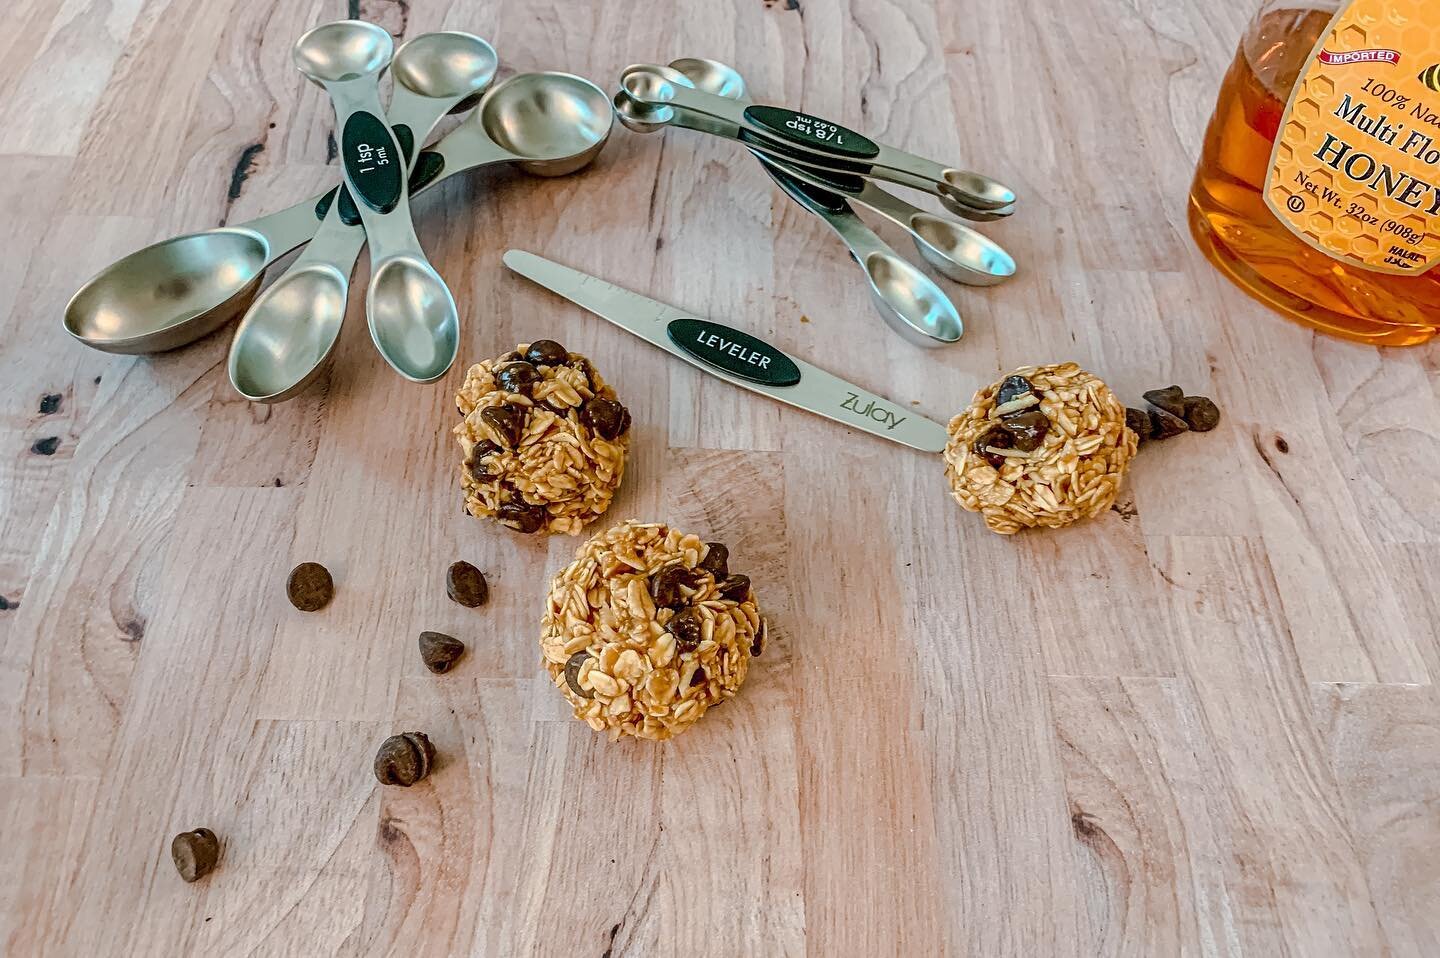 Does anyone else put off making baked goods because it would require you to dig through your drawer and find your measuring spoons that are all separated and missing? 😅😅 Just me?

[#sponsored] Well for the first time ever, when I made these peanut 